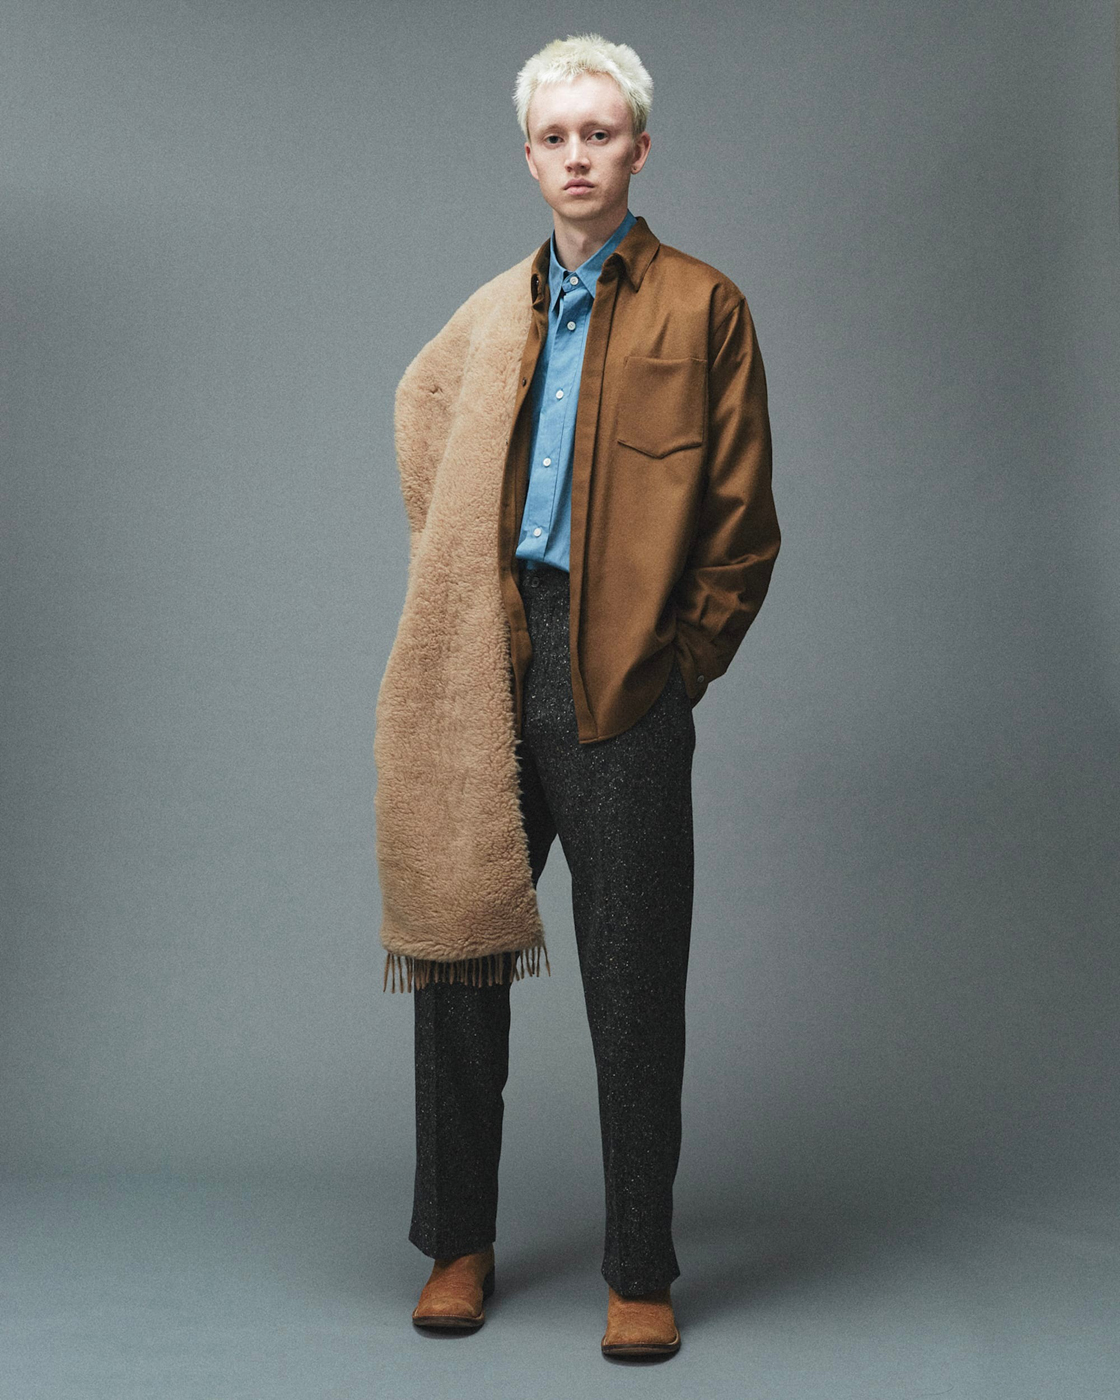 Markaware & Marka Reveal FW23 Collection in Lookbooks